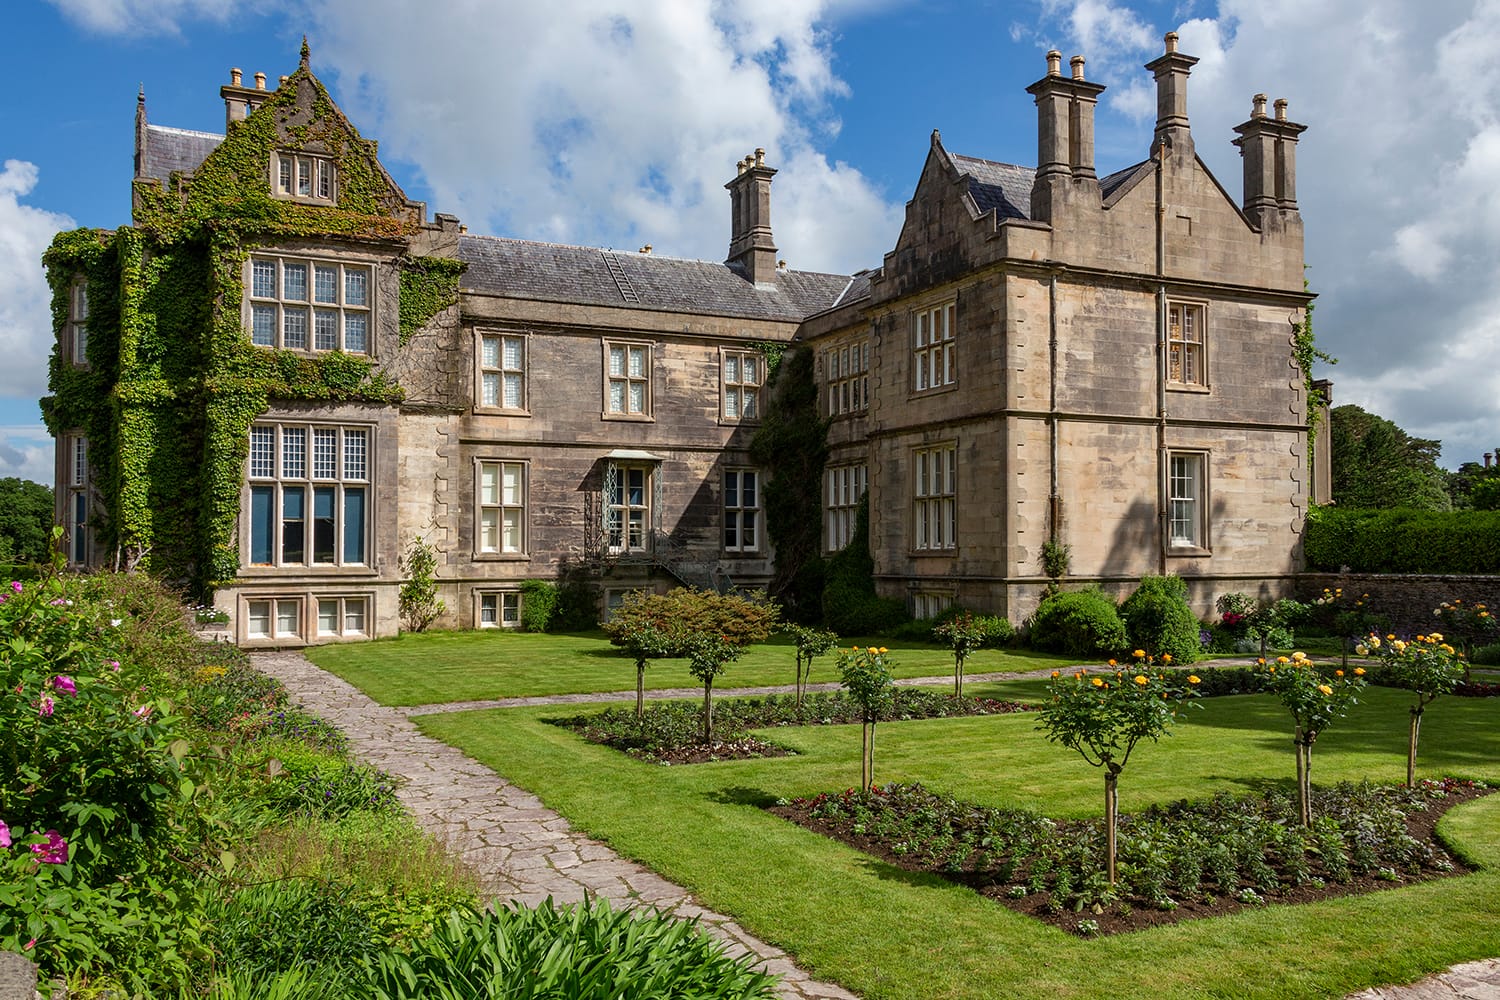 Muckross House - located on Muckross Peninsula between Muckross Lake and Lough Leane, two of the lakes of Killarney, 6km from Killarney in County Kerry, Ireland.